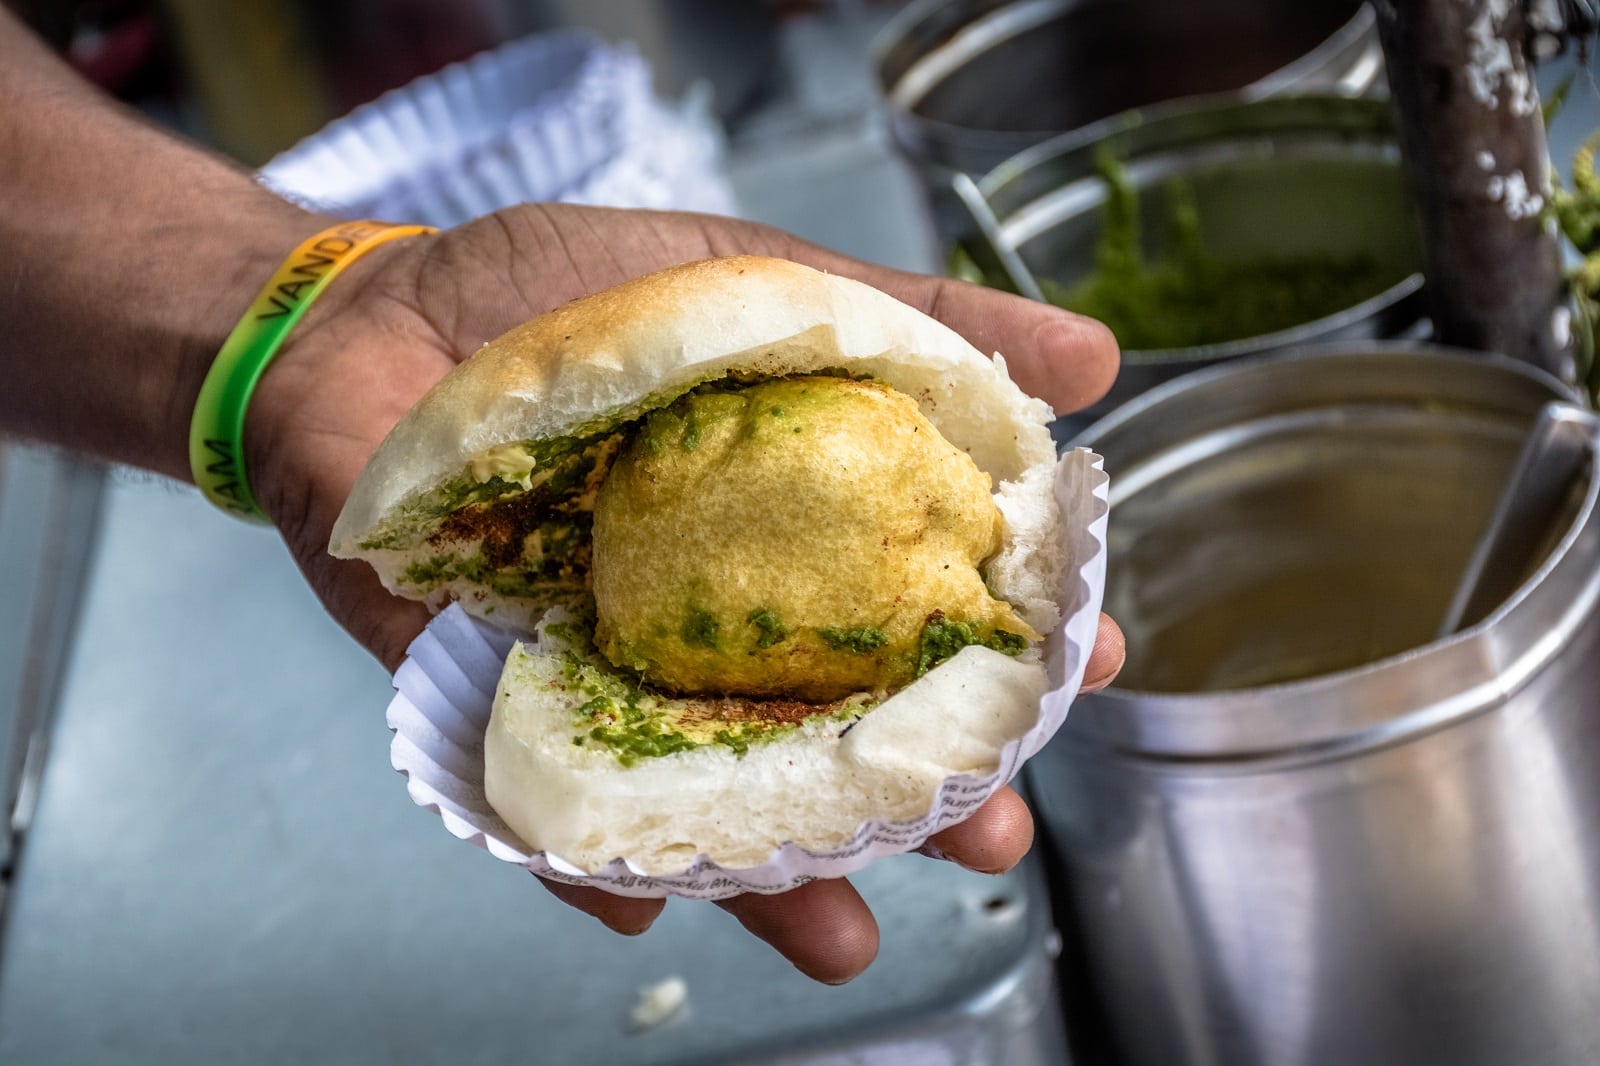 <p><span>Mumbai’s Vada Pav is an irresistible street snack reminiscent of a spicy potato fritter burger. Found at nearly every street corner, especially around Chowpatty Beach, this simple yet flavorful dish consists of a deep-fried potato dumpling placed inside a soft bread bun (pav), served with spicy green chutney and garlic powder. It’s a beloved comfort food among locals, offering a taste of authentic Mumbai.</span></p> <p><b>Insider’s Tip: </b><span>Pair it with a cup of cutting chai.</span></p> <p><b>When To Travel: </b><span>November to February for pleasant weather.</span></p> <p><b>How To Get There: </b><span>Fly to Mumbai’s Chhatrapati Shivaji Maharaj International Airport.</span></p>